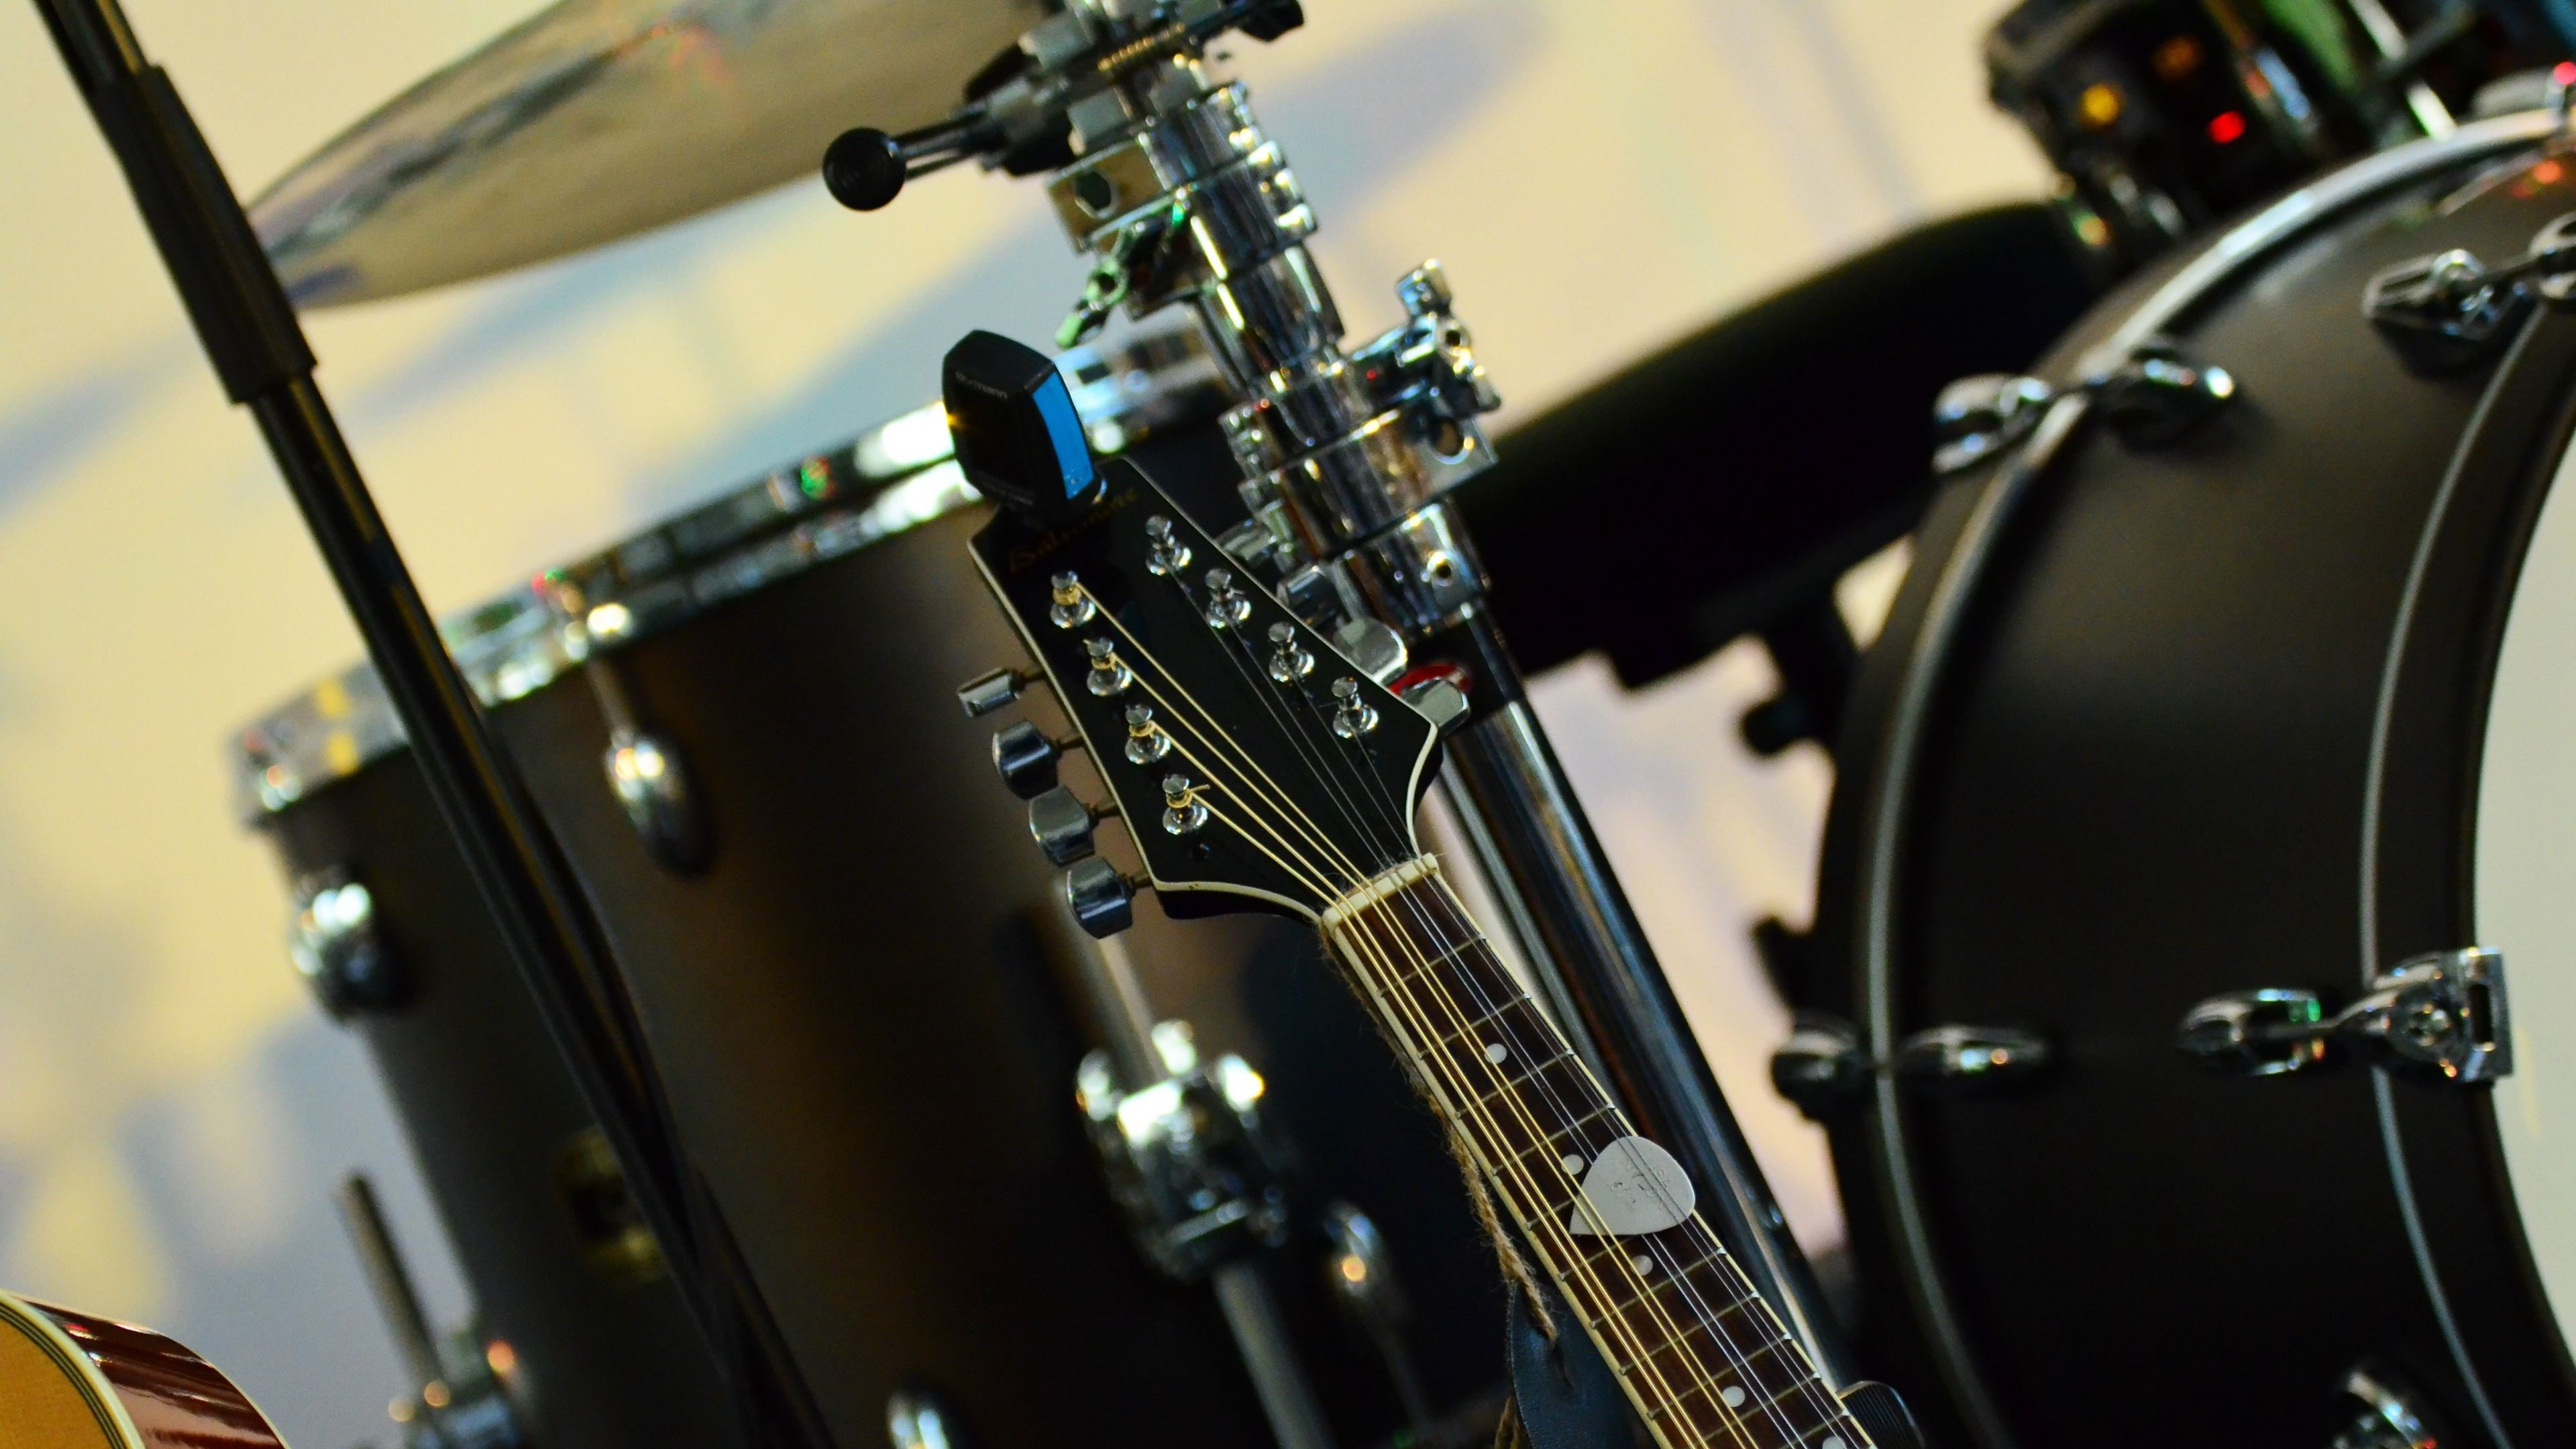 Musical Instruments: Guitar head, Tuning keys, Nut, Accessories for the band and orchestra. 3840x2160 4K Wallpaper.